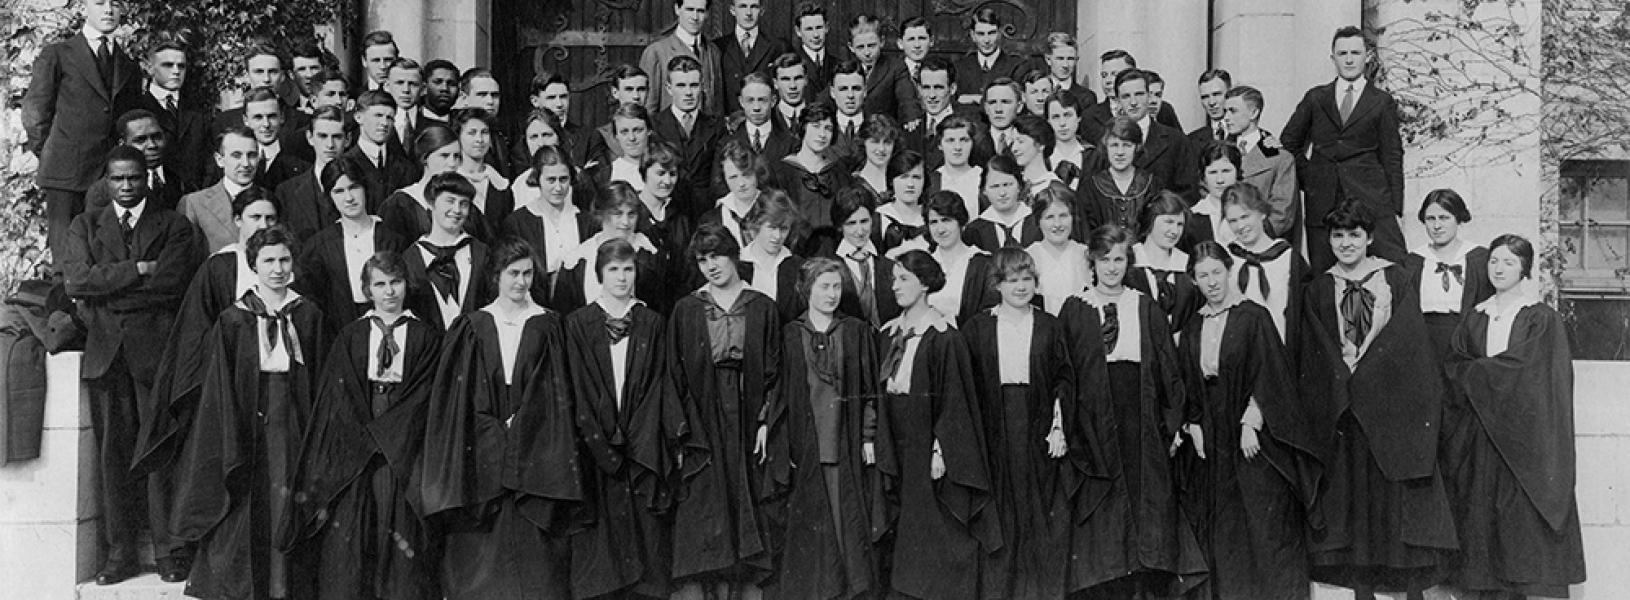 A 1916 archival photo of members of Arts 1920.